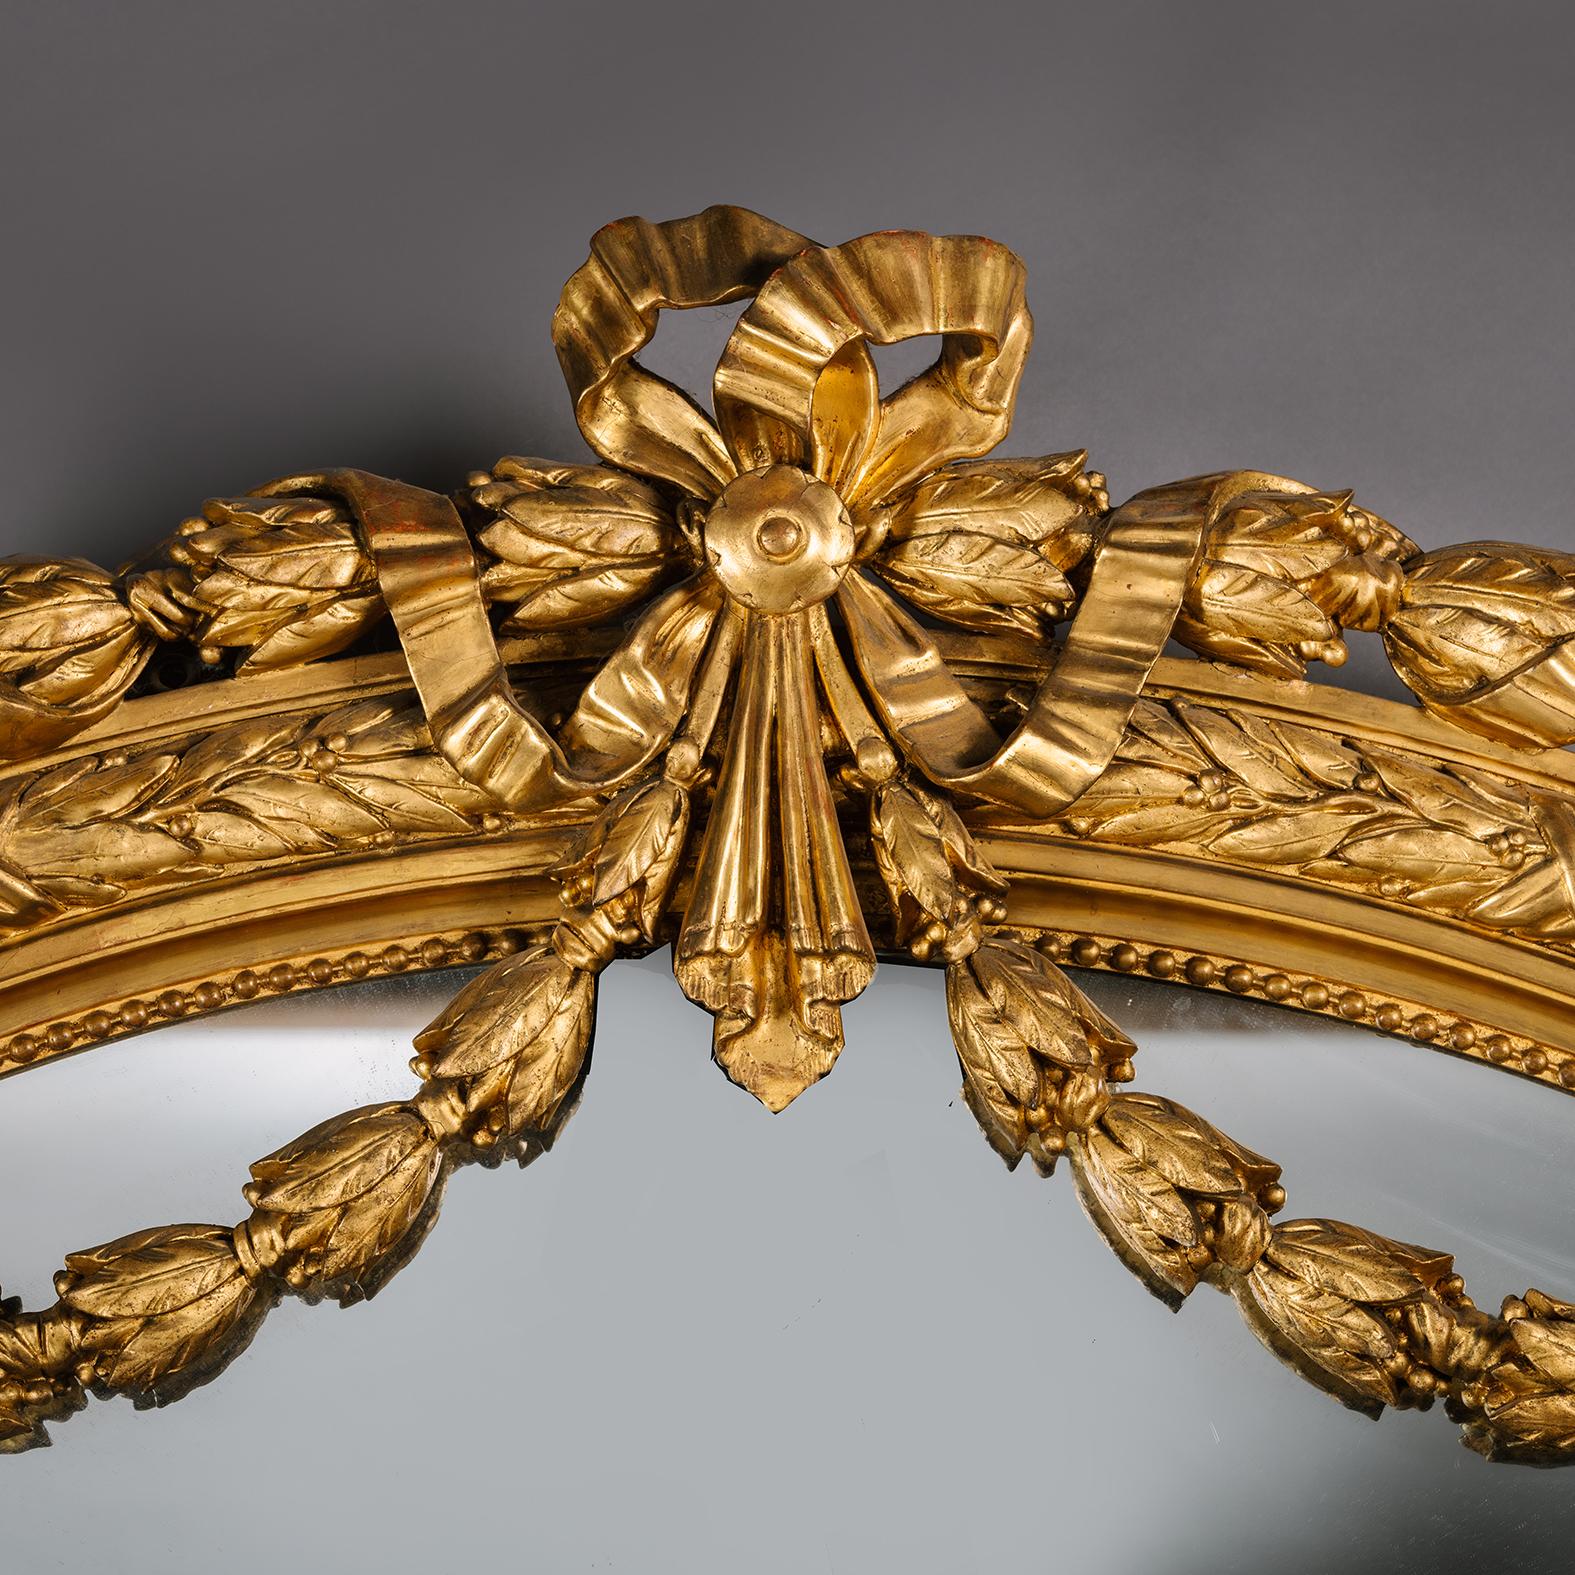 A Large Napoleon III Carved Giltwood & Gesso Mirror. 

Grand in size and decoration, this impressive Napoleon III period overmantel mirror is designed in the Louis XVI style with an arched pediment centred by an elaborate ribbon tied cresting